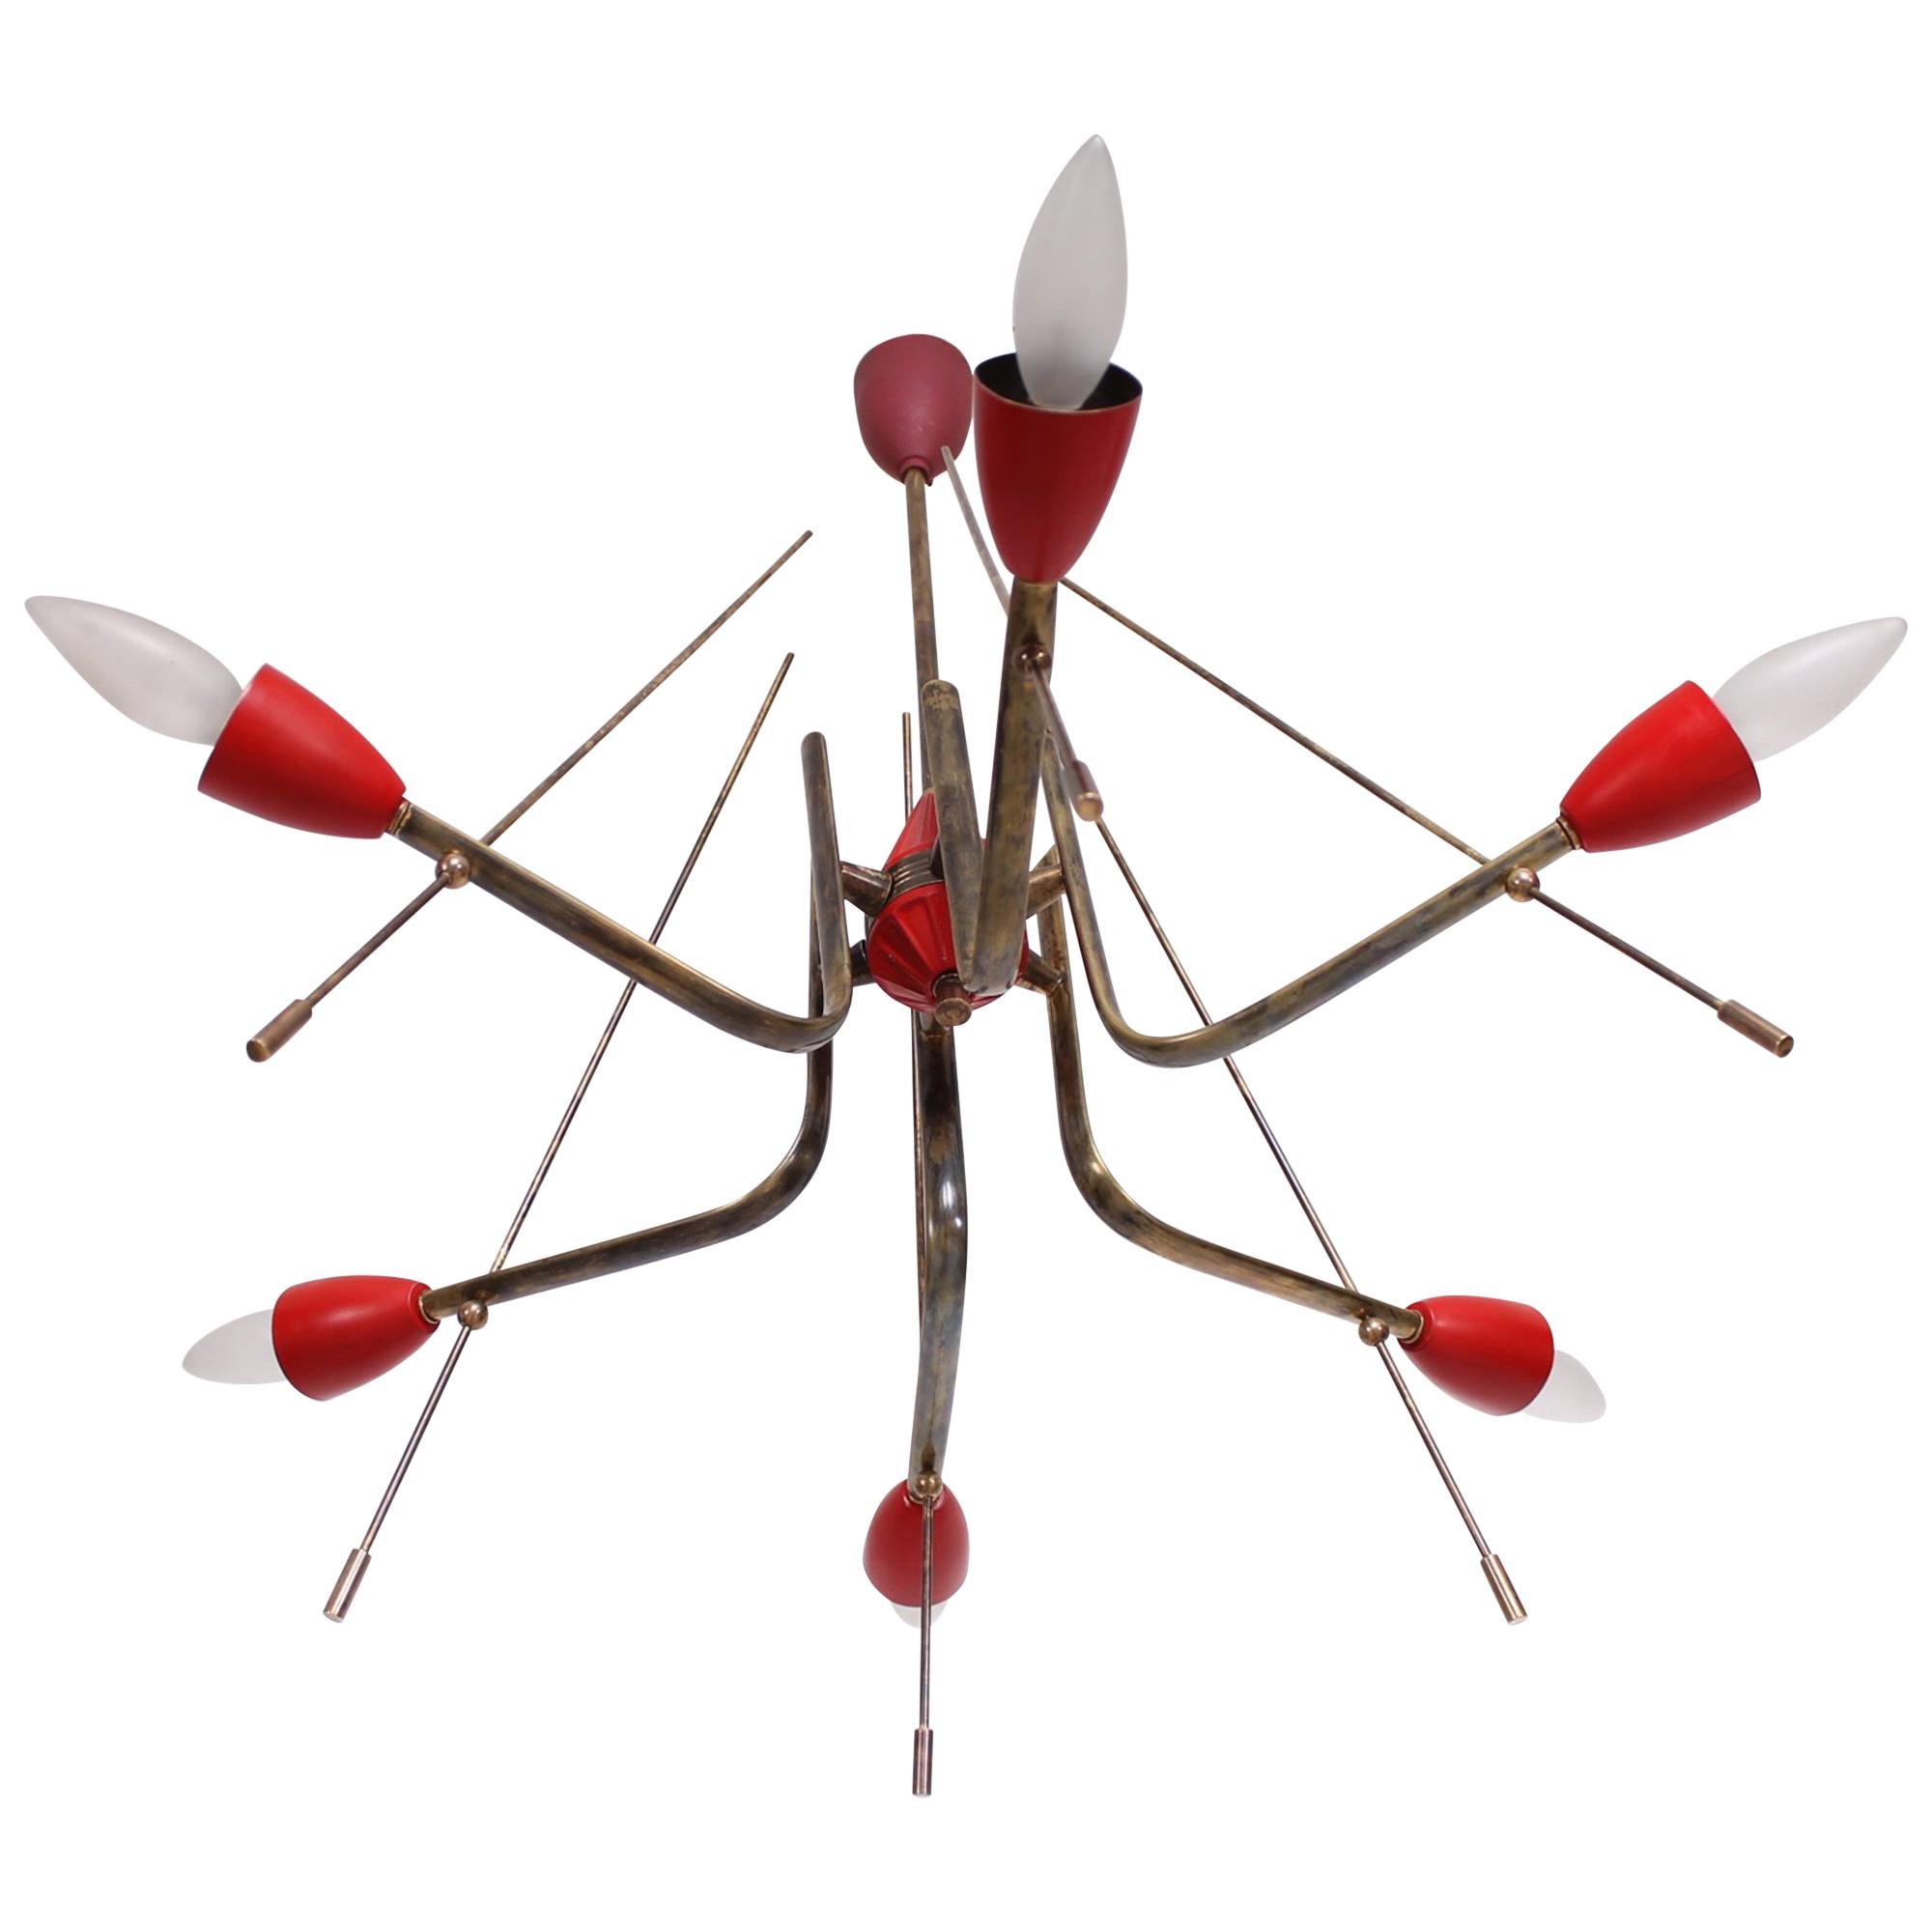 AMBIANIC presents
Atomic Age Futuristic Italian Red Chandelier 1950s ITALY
Constructed in Solid Brass with Aluminum Shades Painted RED.
Unmarked attributed style of Stilnovo.
21 .75 in diameter (without the bulbs) x 26 tall. 
Original vintage